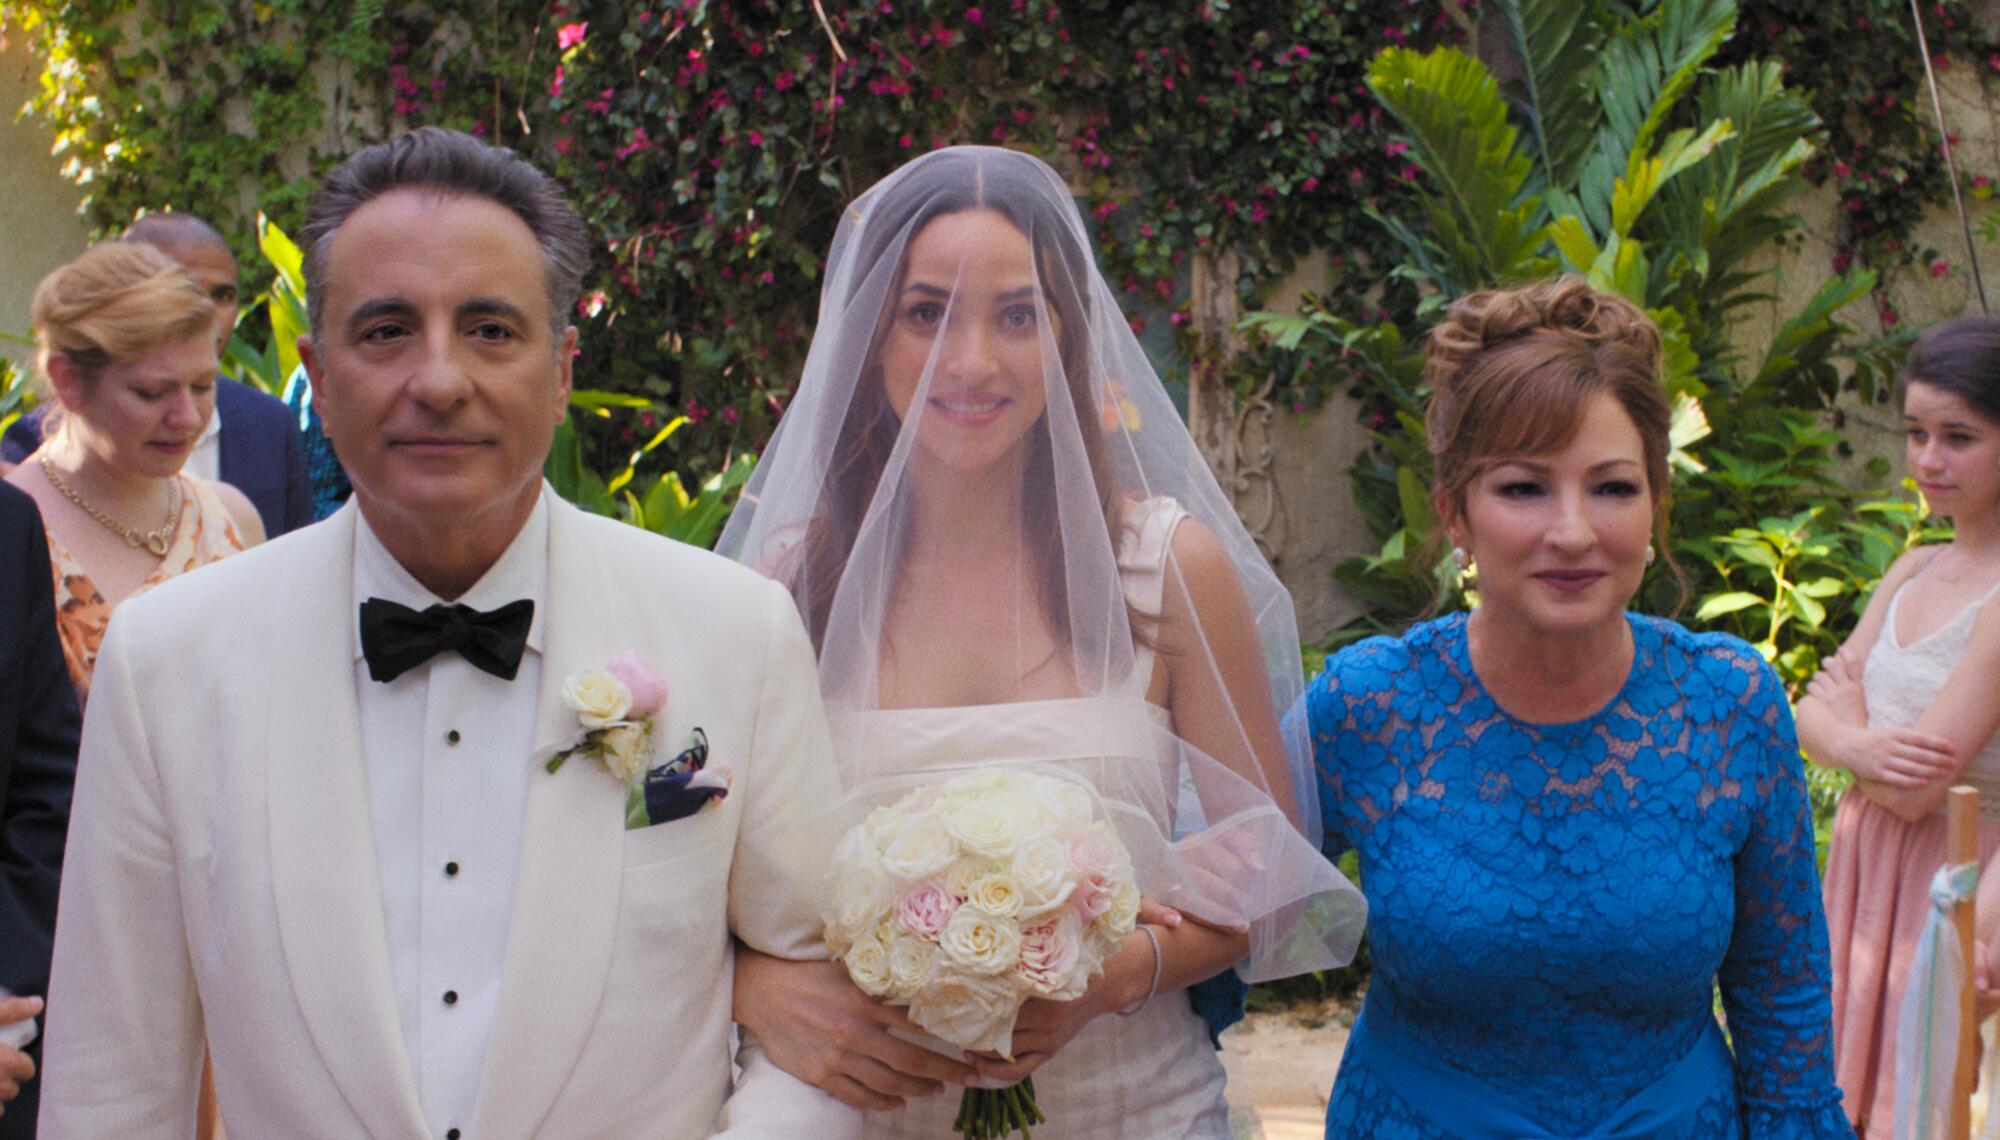 From left, Andy Garcia as Billy, Adria Arjona as Sofia and Gloria Estefan as Ingrid in "Father of the Bride."